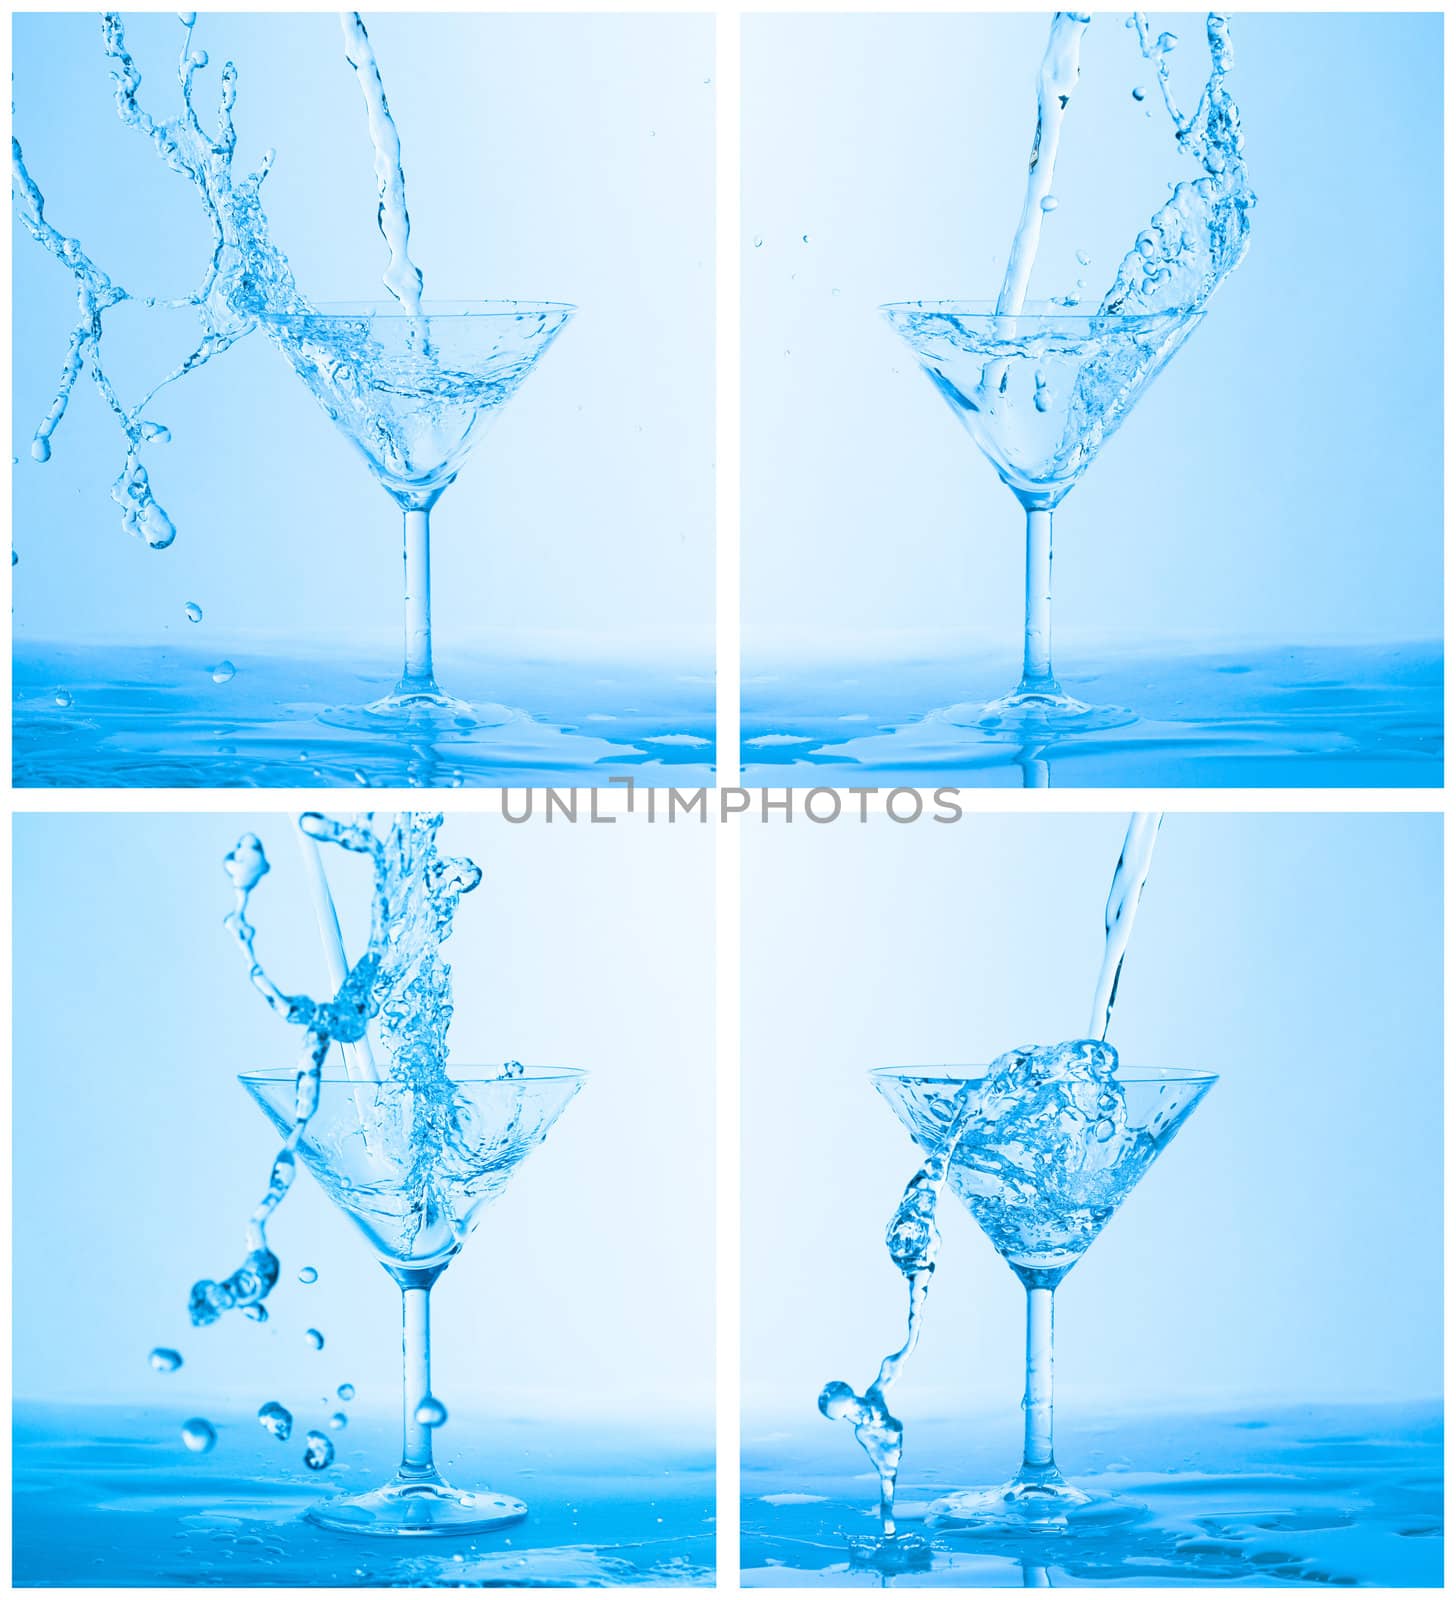 Collage of Water Splashing in a Wineglass, on blue background